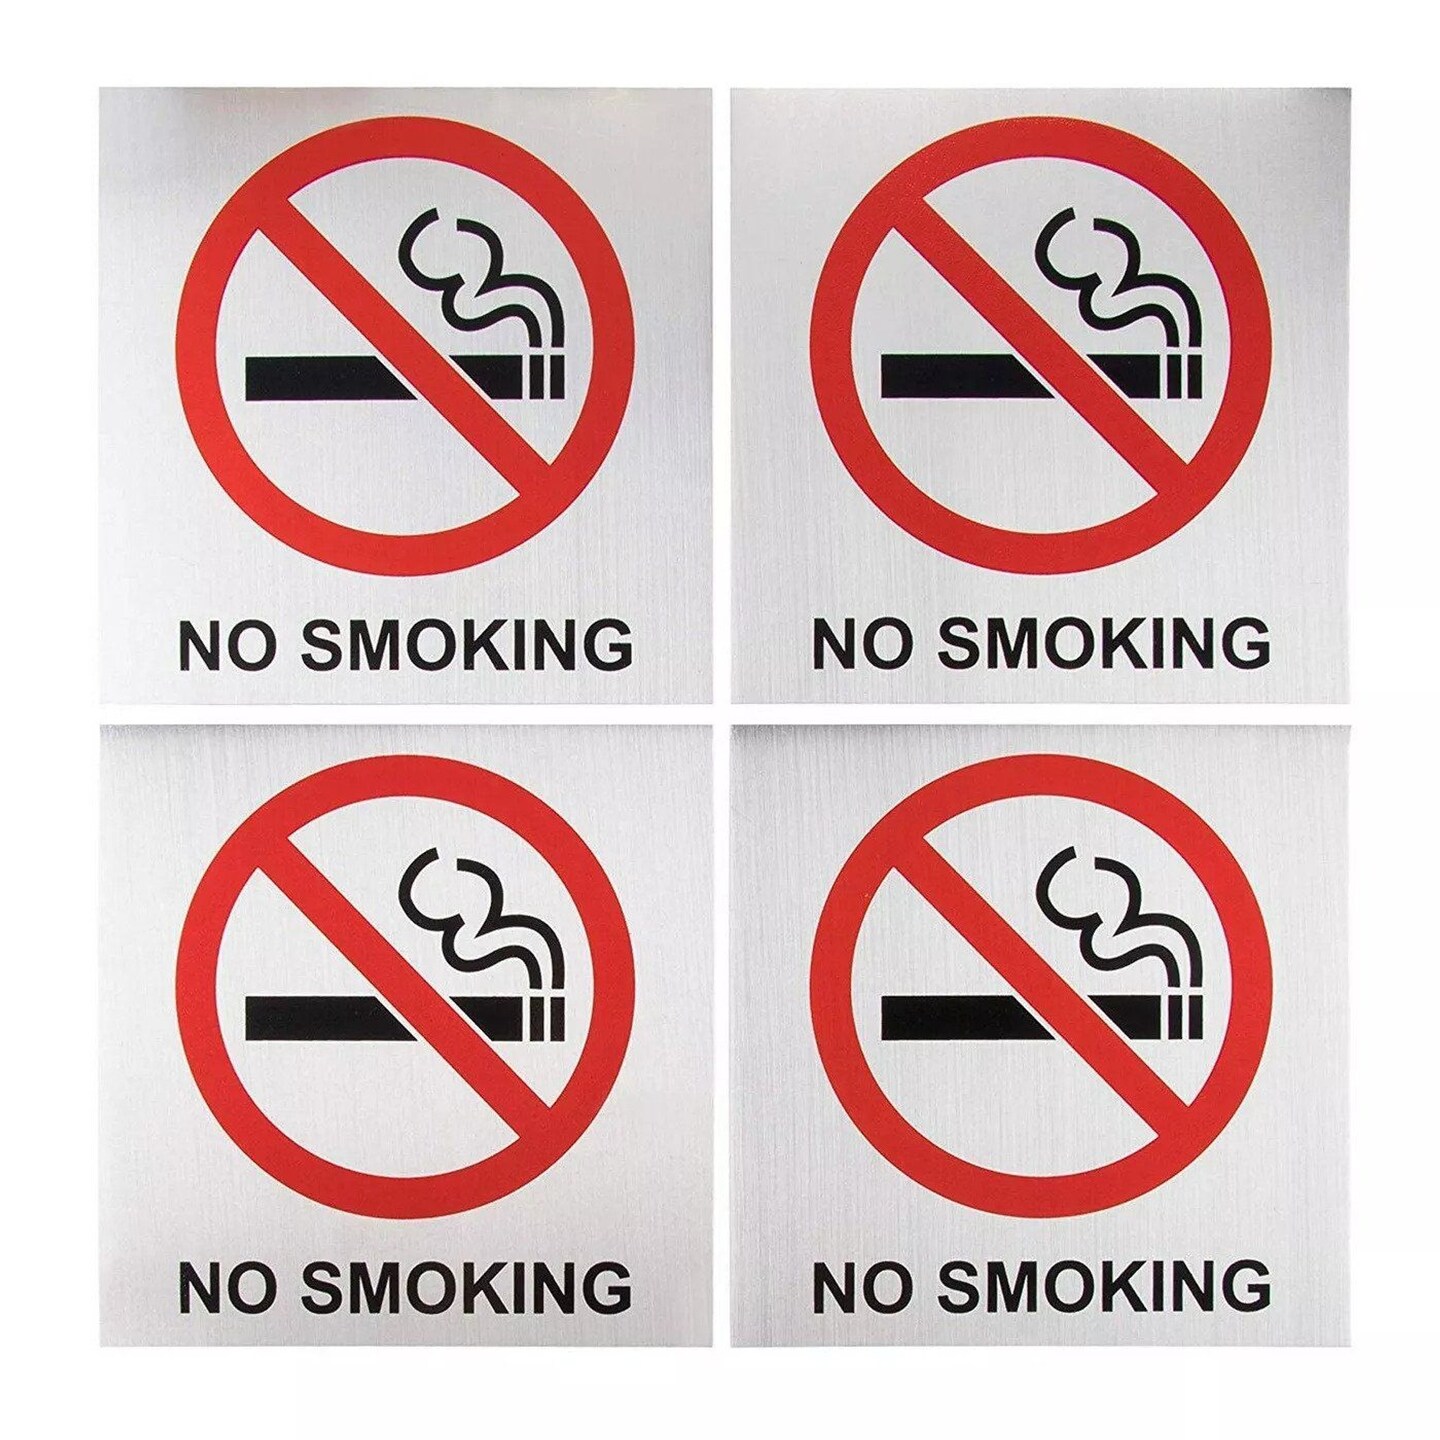 4-Pack 5.5 x 5.5 Inch No Smoking Signs for Business - Self-Adhesive Metal Stickers for Homes, Vehicles and Outdoors